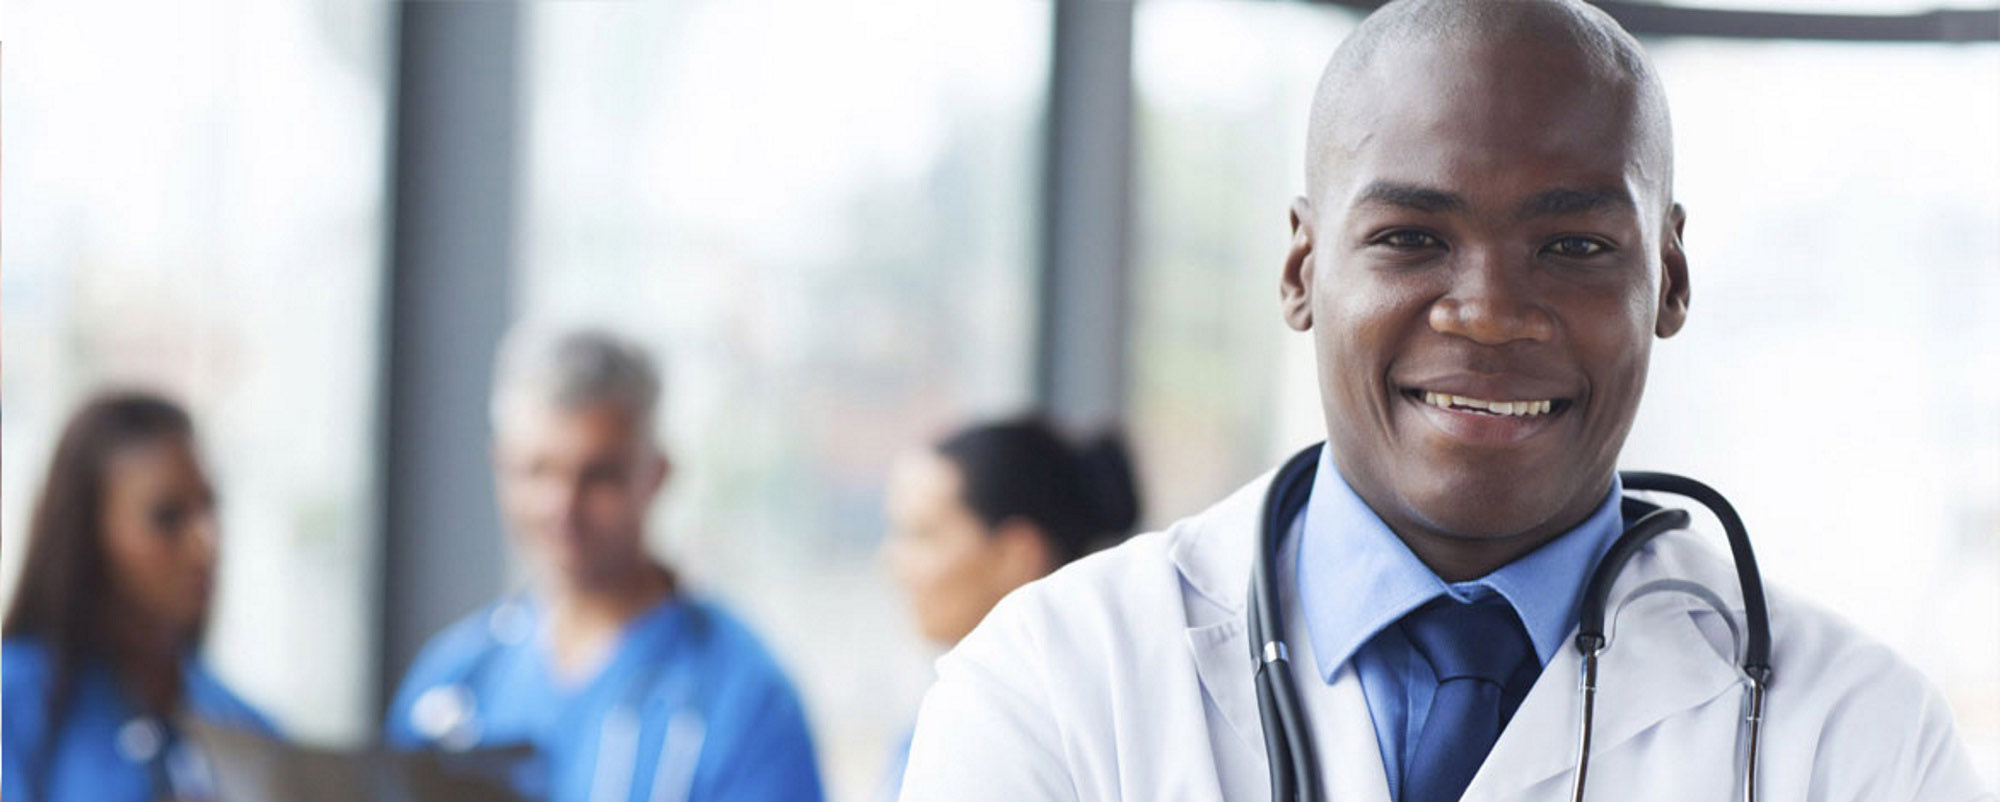 Qualified Doctors With Expertise in Services We Offer